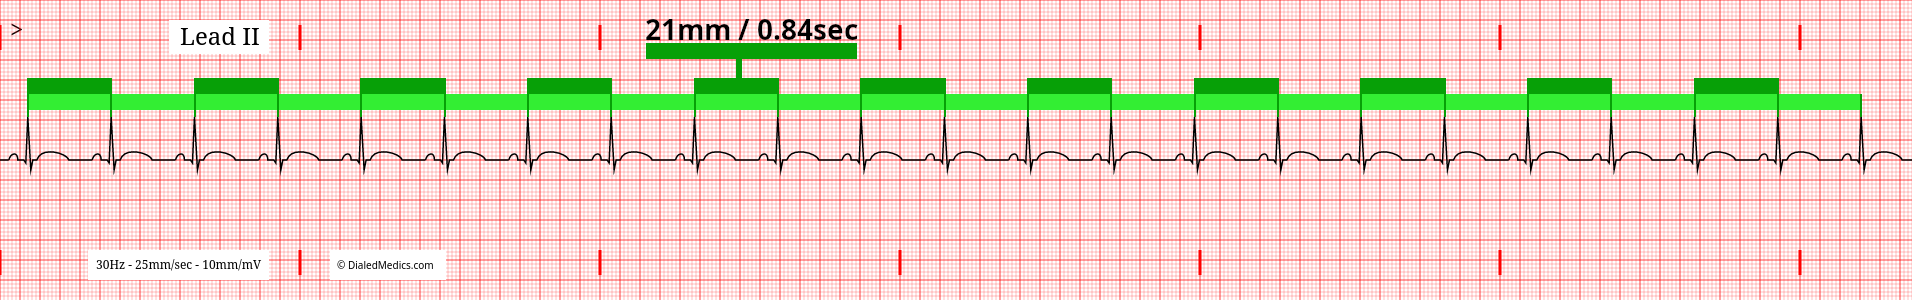 ECG tracing of a Normal Sinus Rhythm with 21mm equal R-R Intervals highlighted.